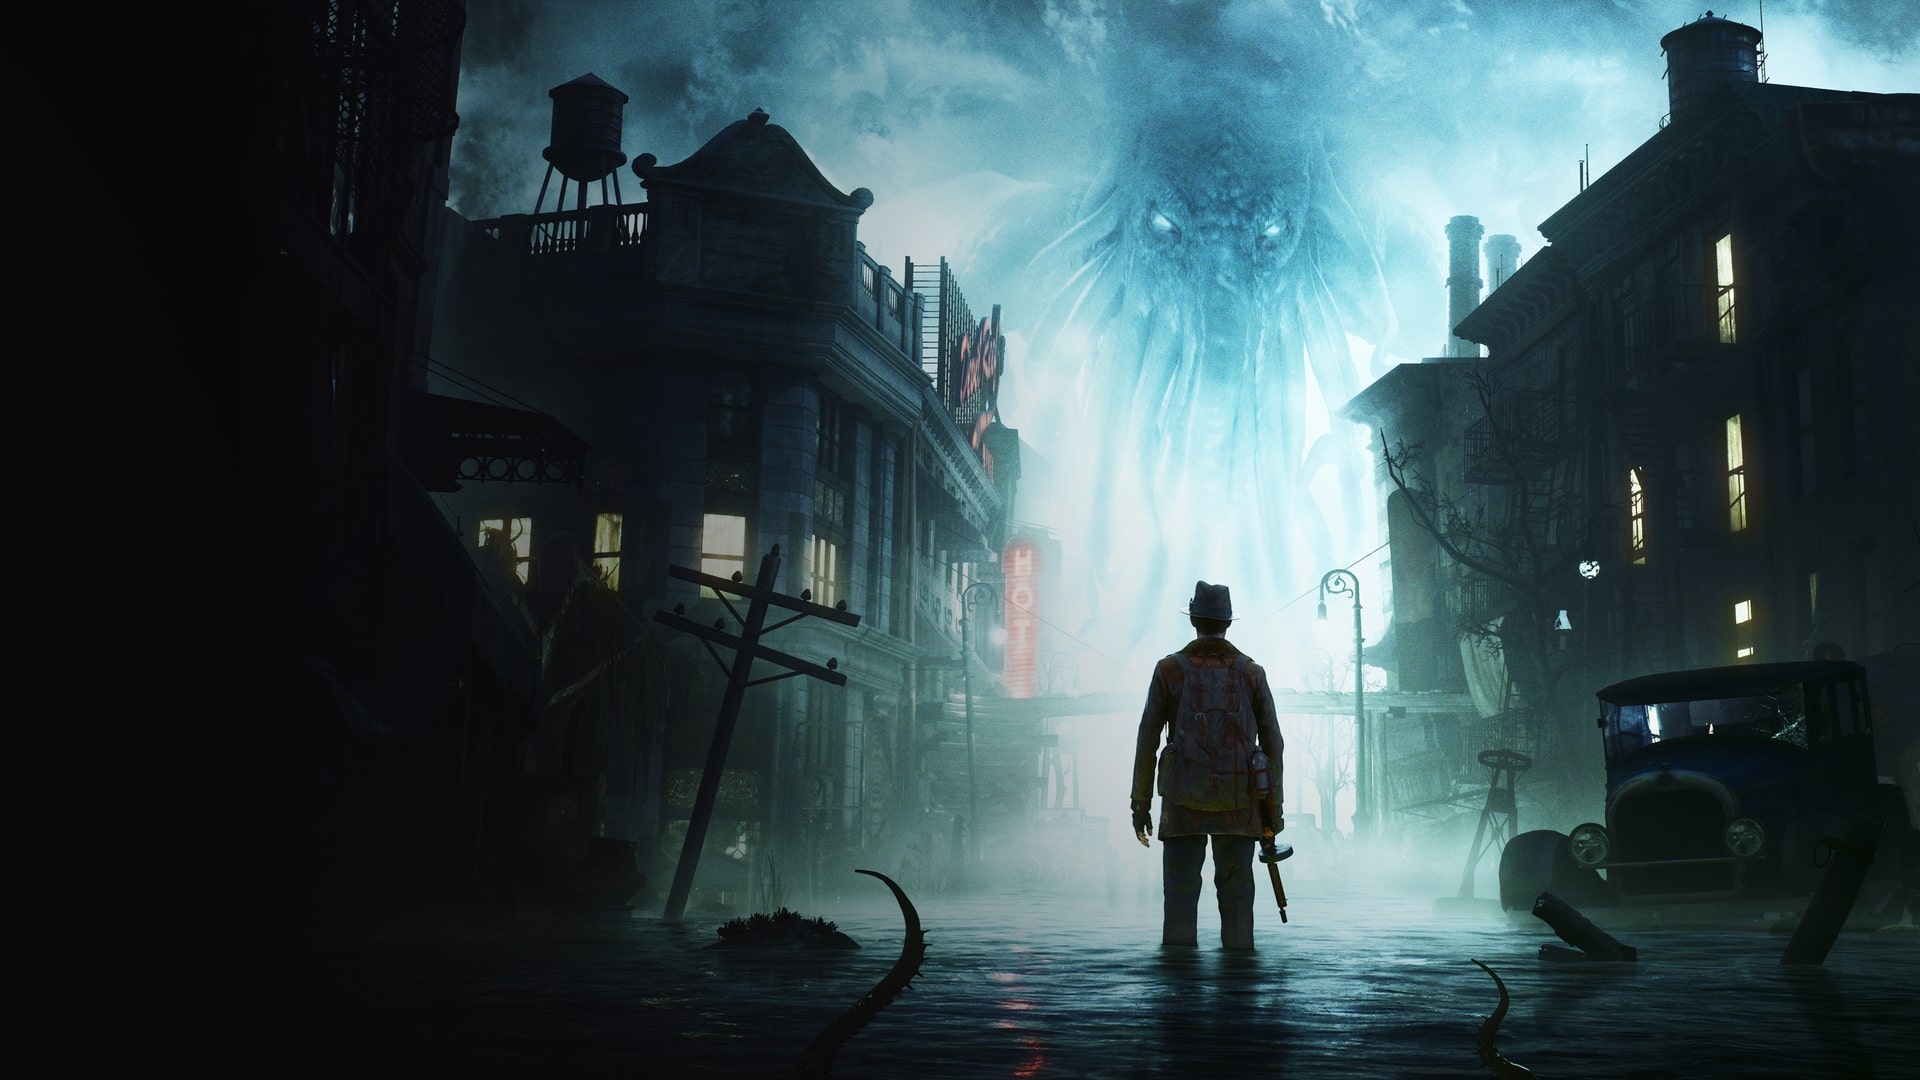 The Sinking City – PS4